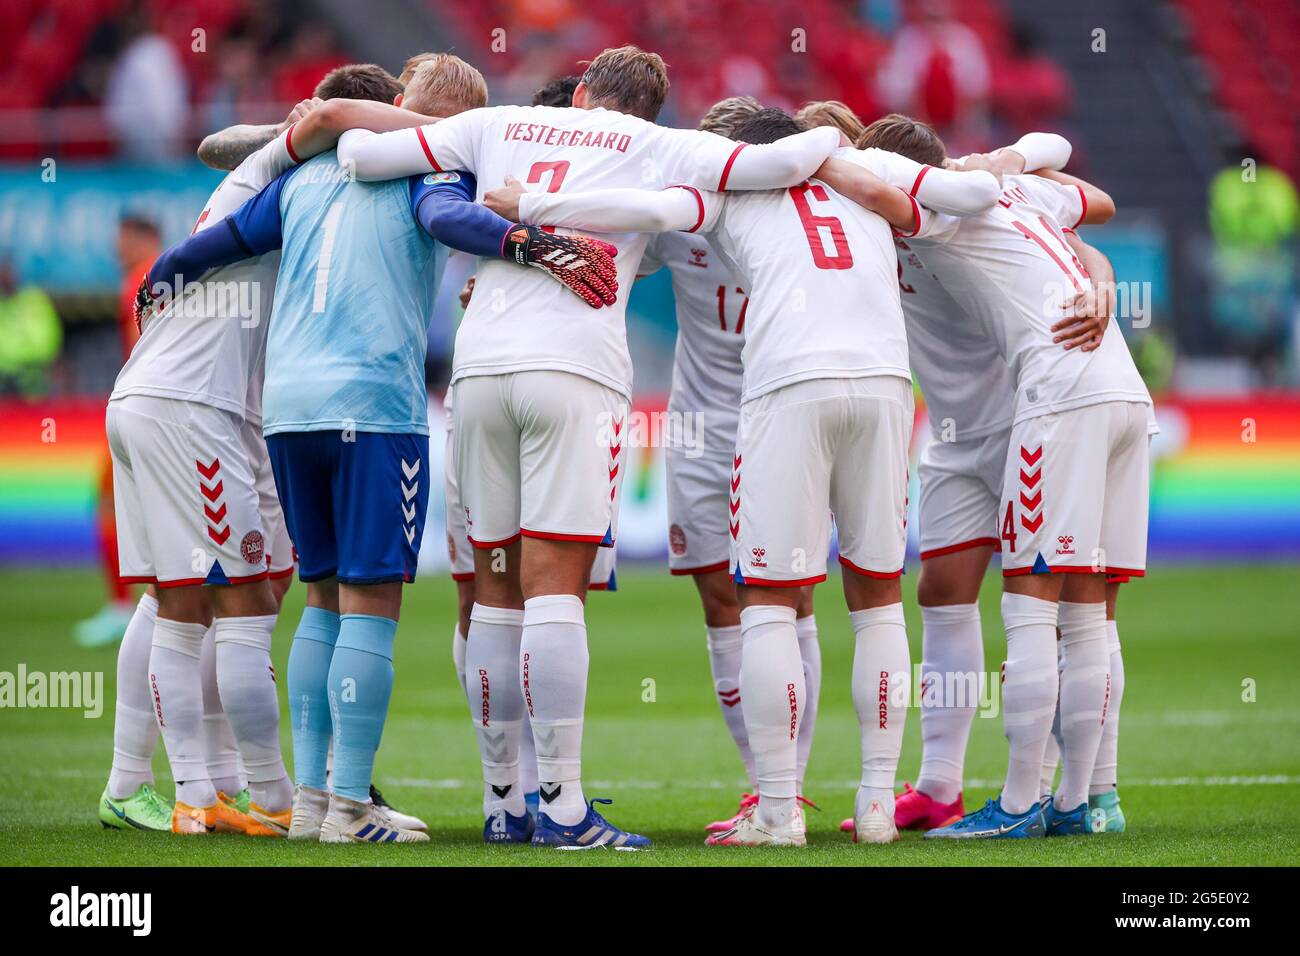 AMSTERDAM, NETHERLANDS - JUNE 26: Team Denmark during the UEFA Euro 2020 Championship 1/8 final match between Wales and Denmark at the Johan Cruijff ArenA on June 26, 2021 in Amsterdam, Netherlands (Photo by Marcel ter Bals/Orange Pictures) Credit: Orange Pics BV/Alamy Live News Stock Photo